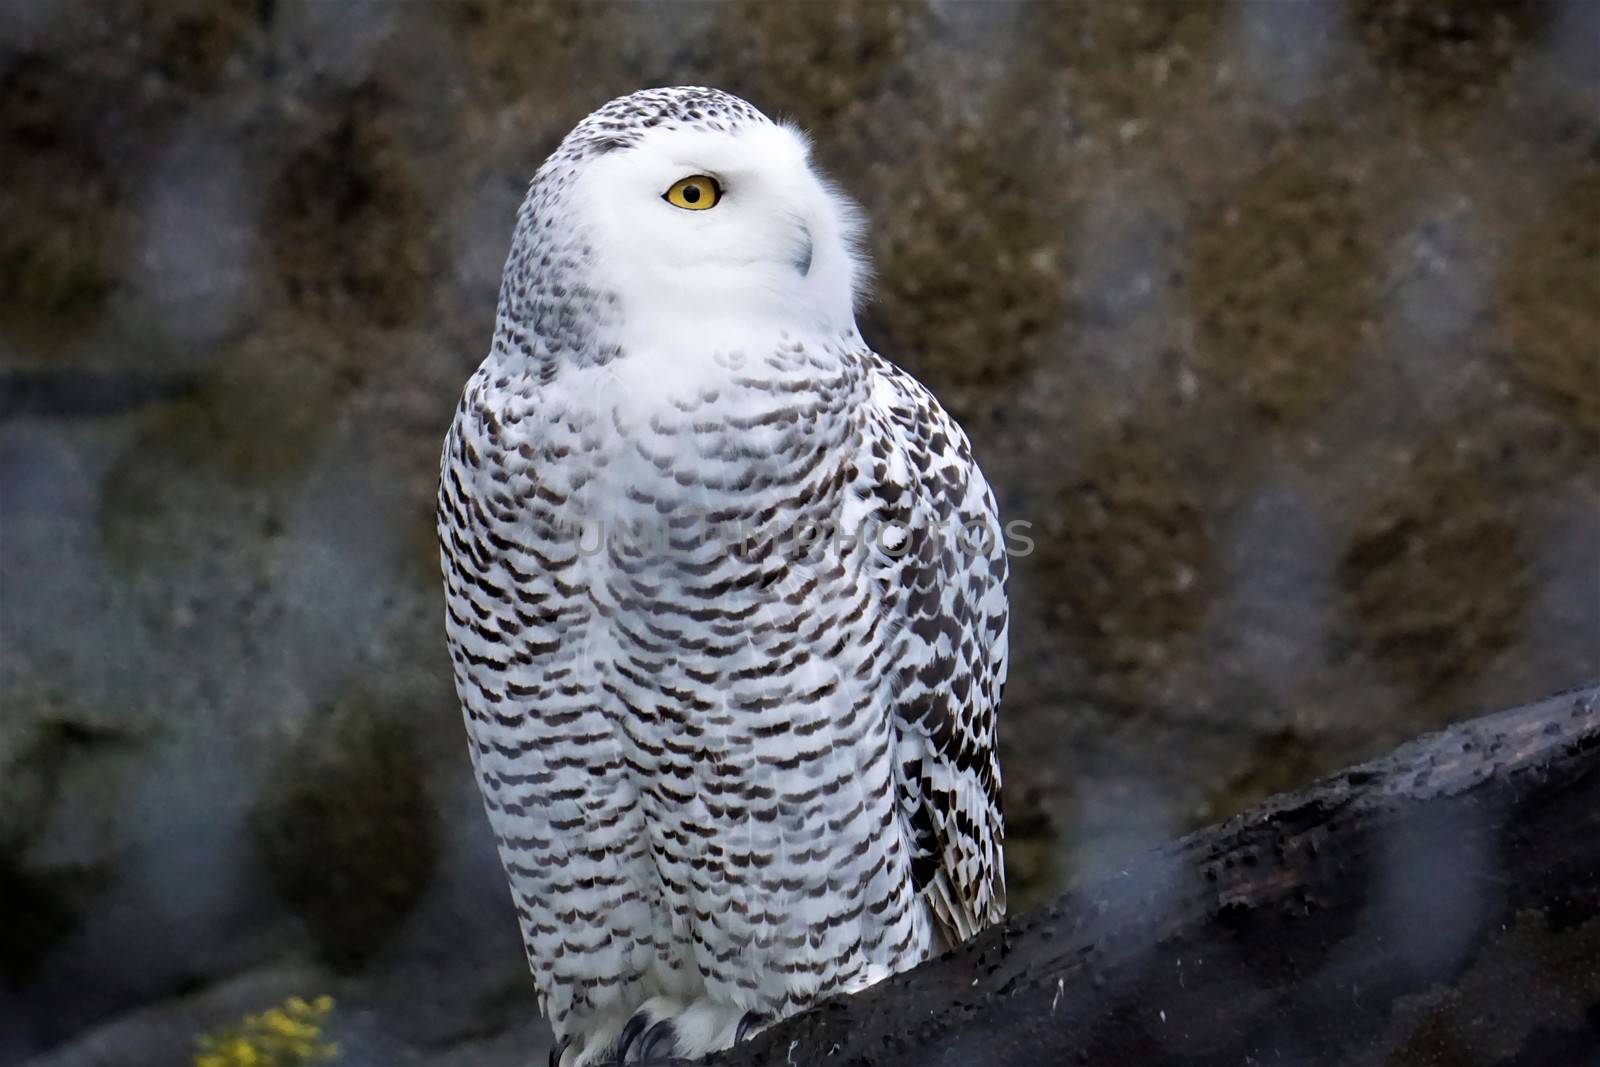 A snowy owl in the zoo looking away